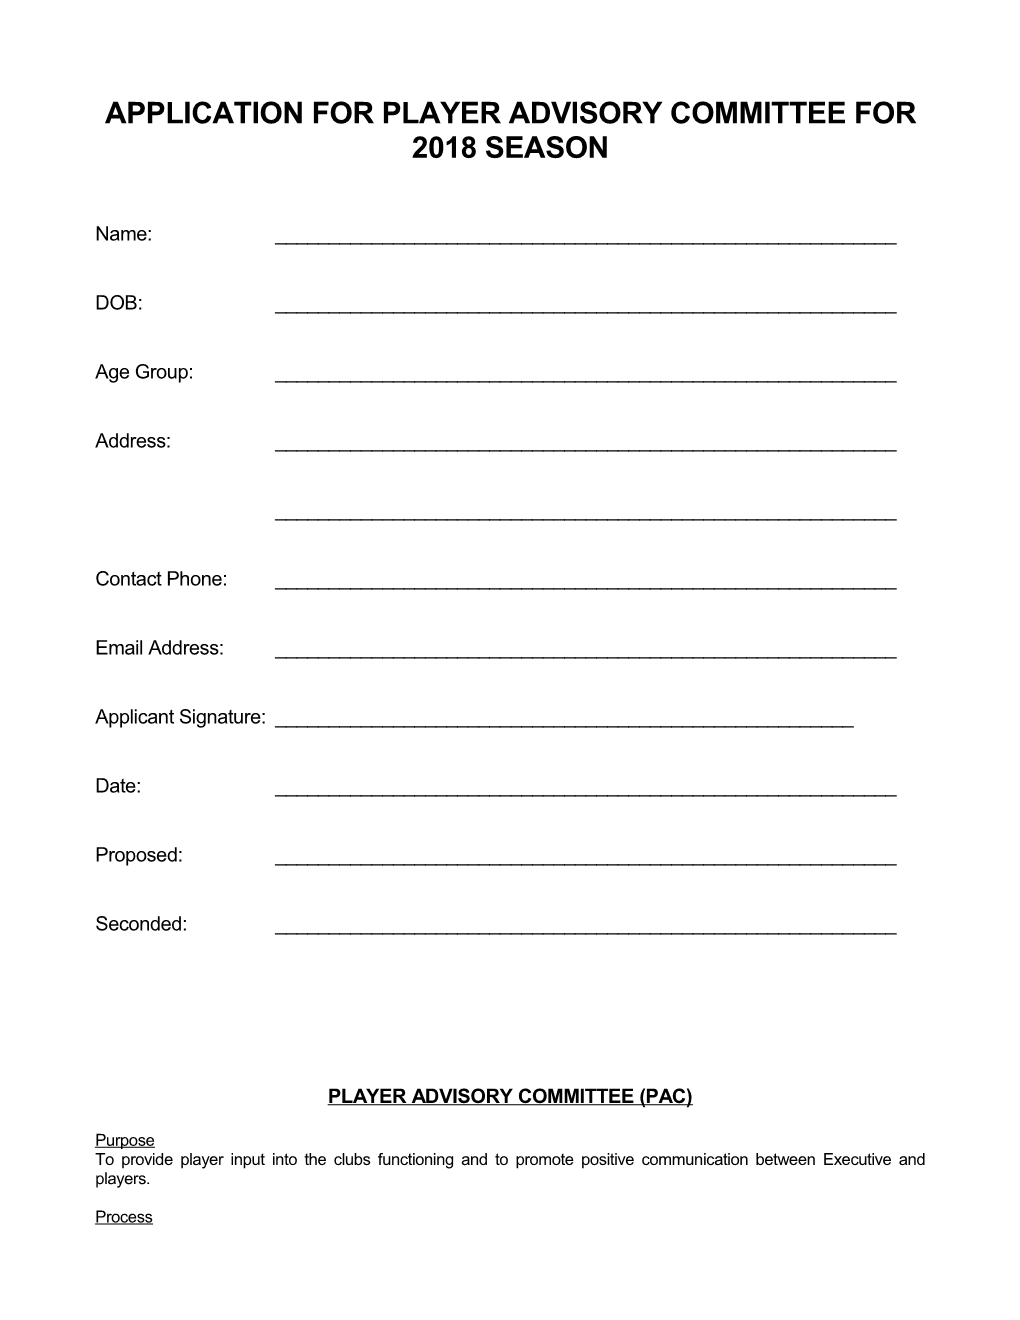 Application for Player Advisory Committee for 2018 Season